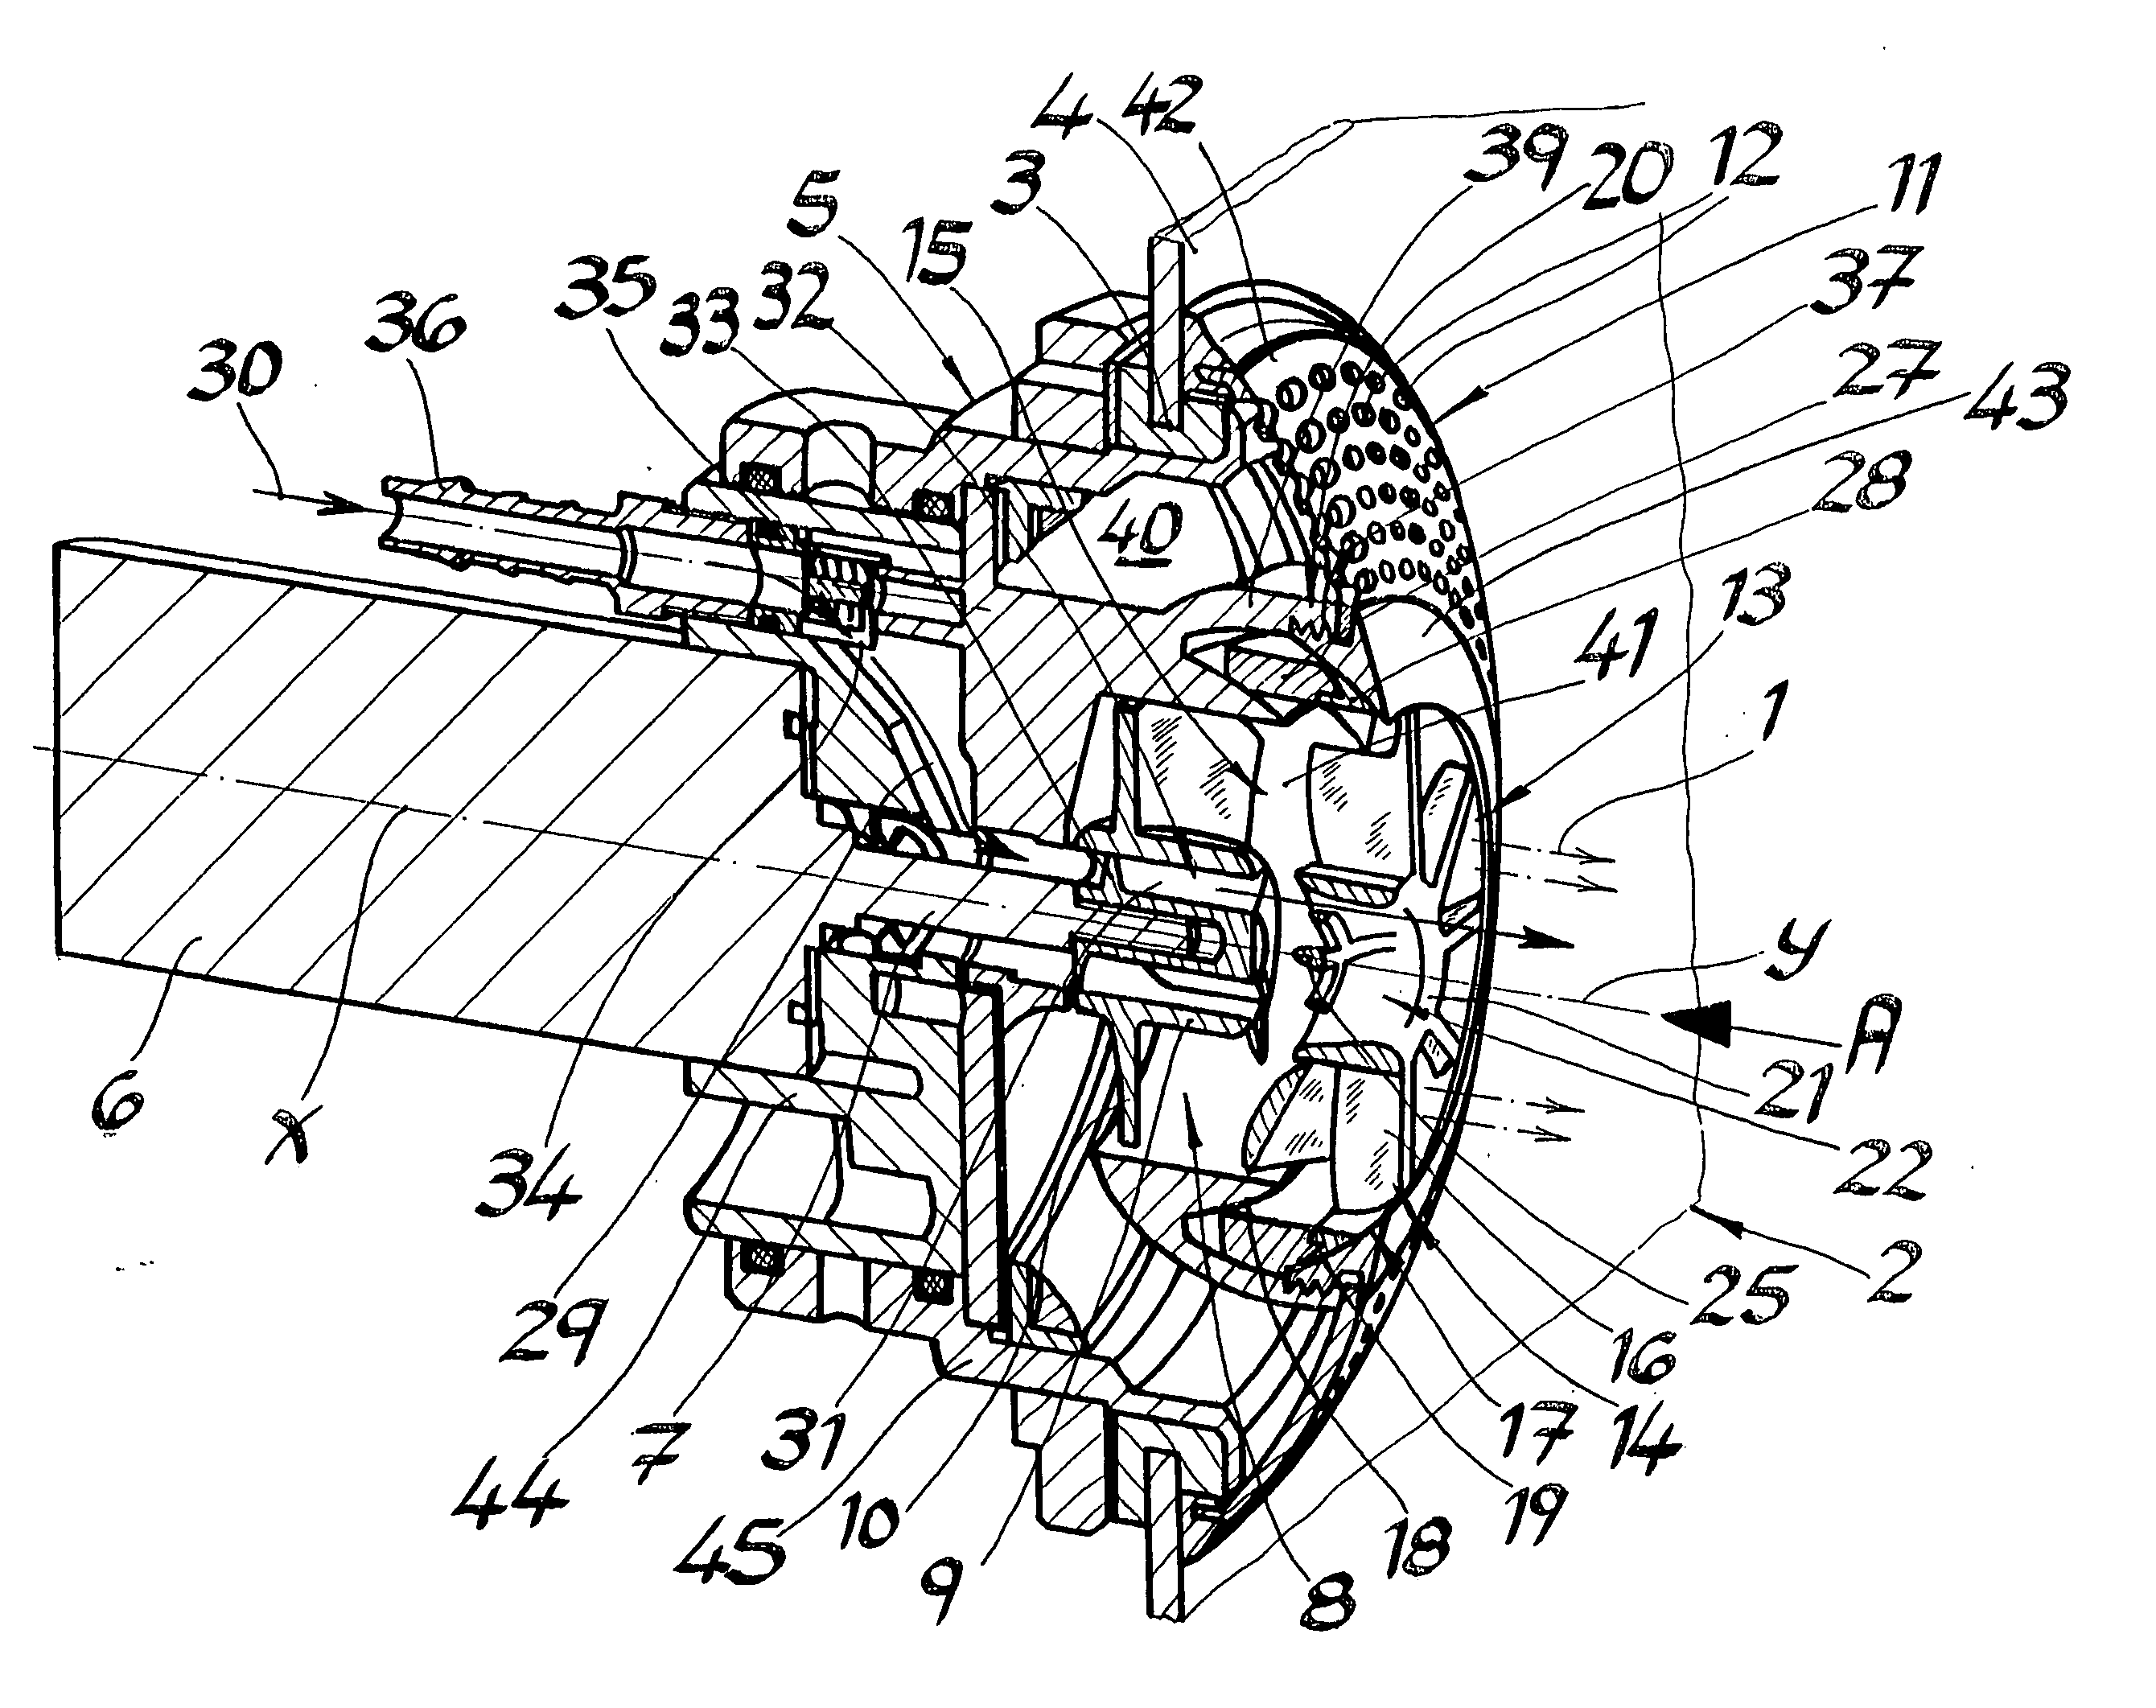 Device for generating a massage stream in a sanitary tub